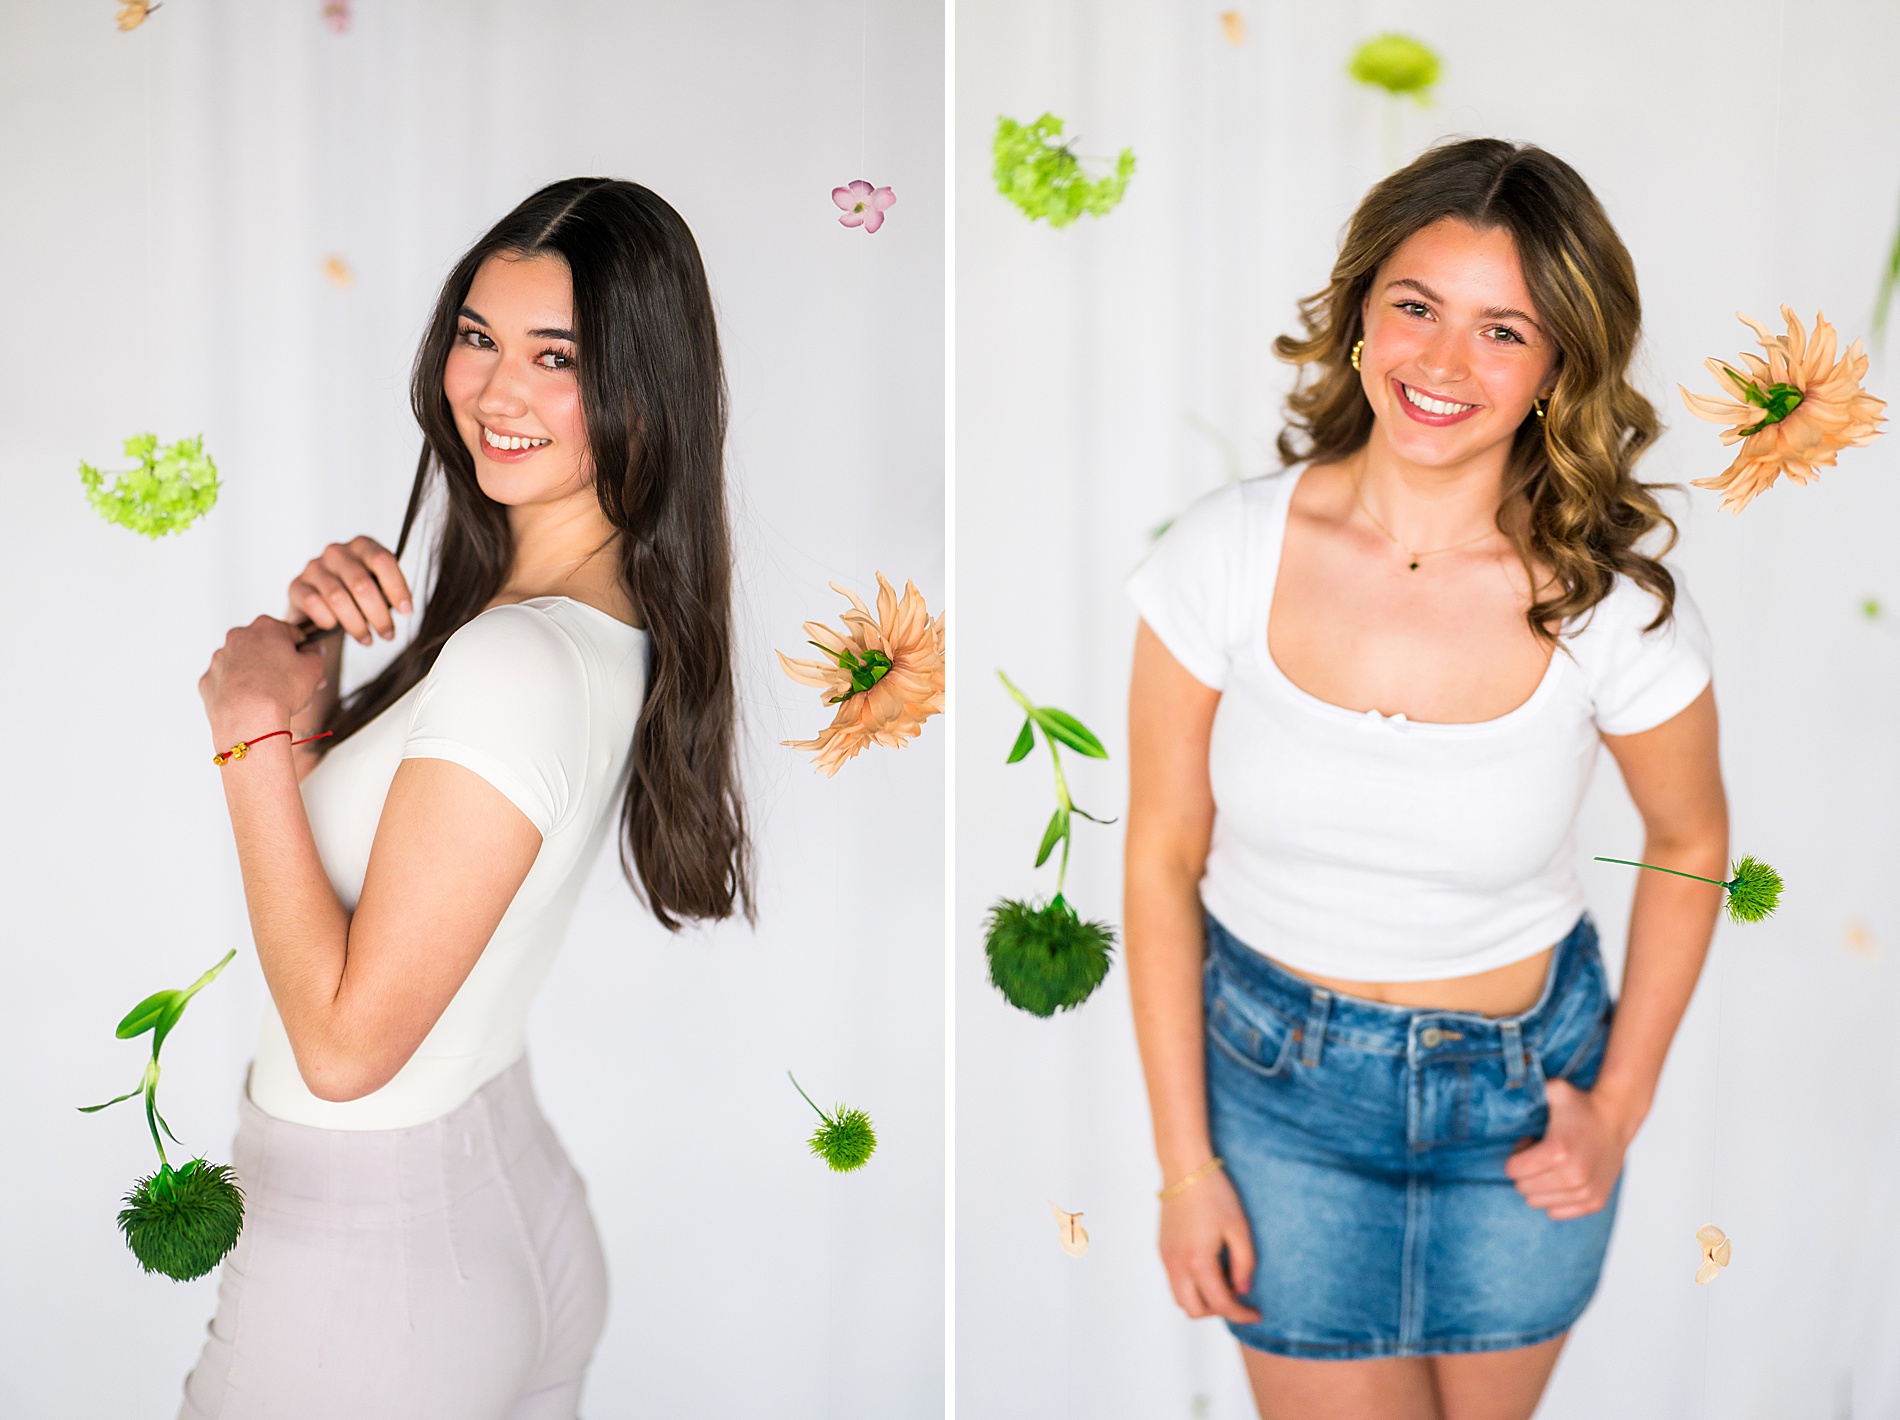 spokesmodels pose for spring for photoshoot